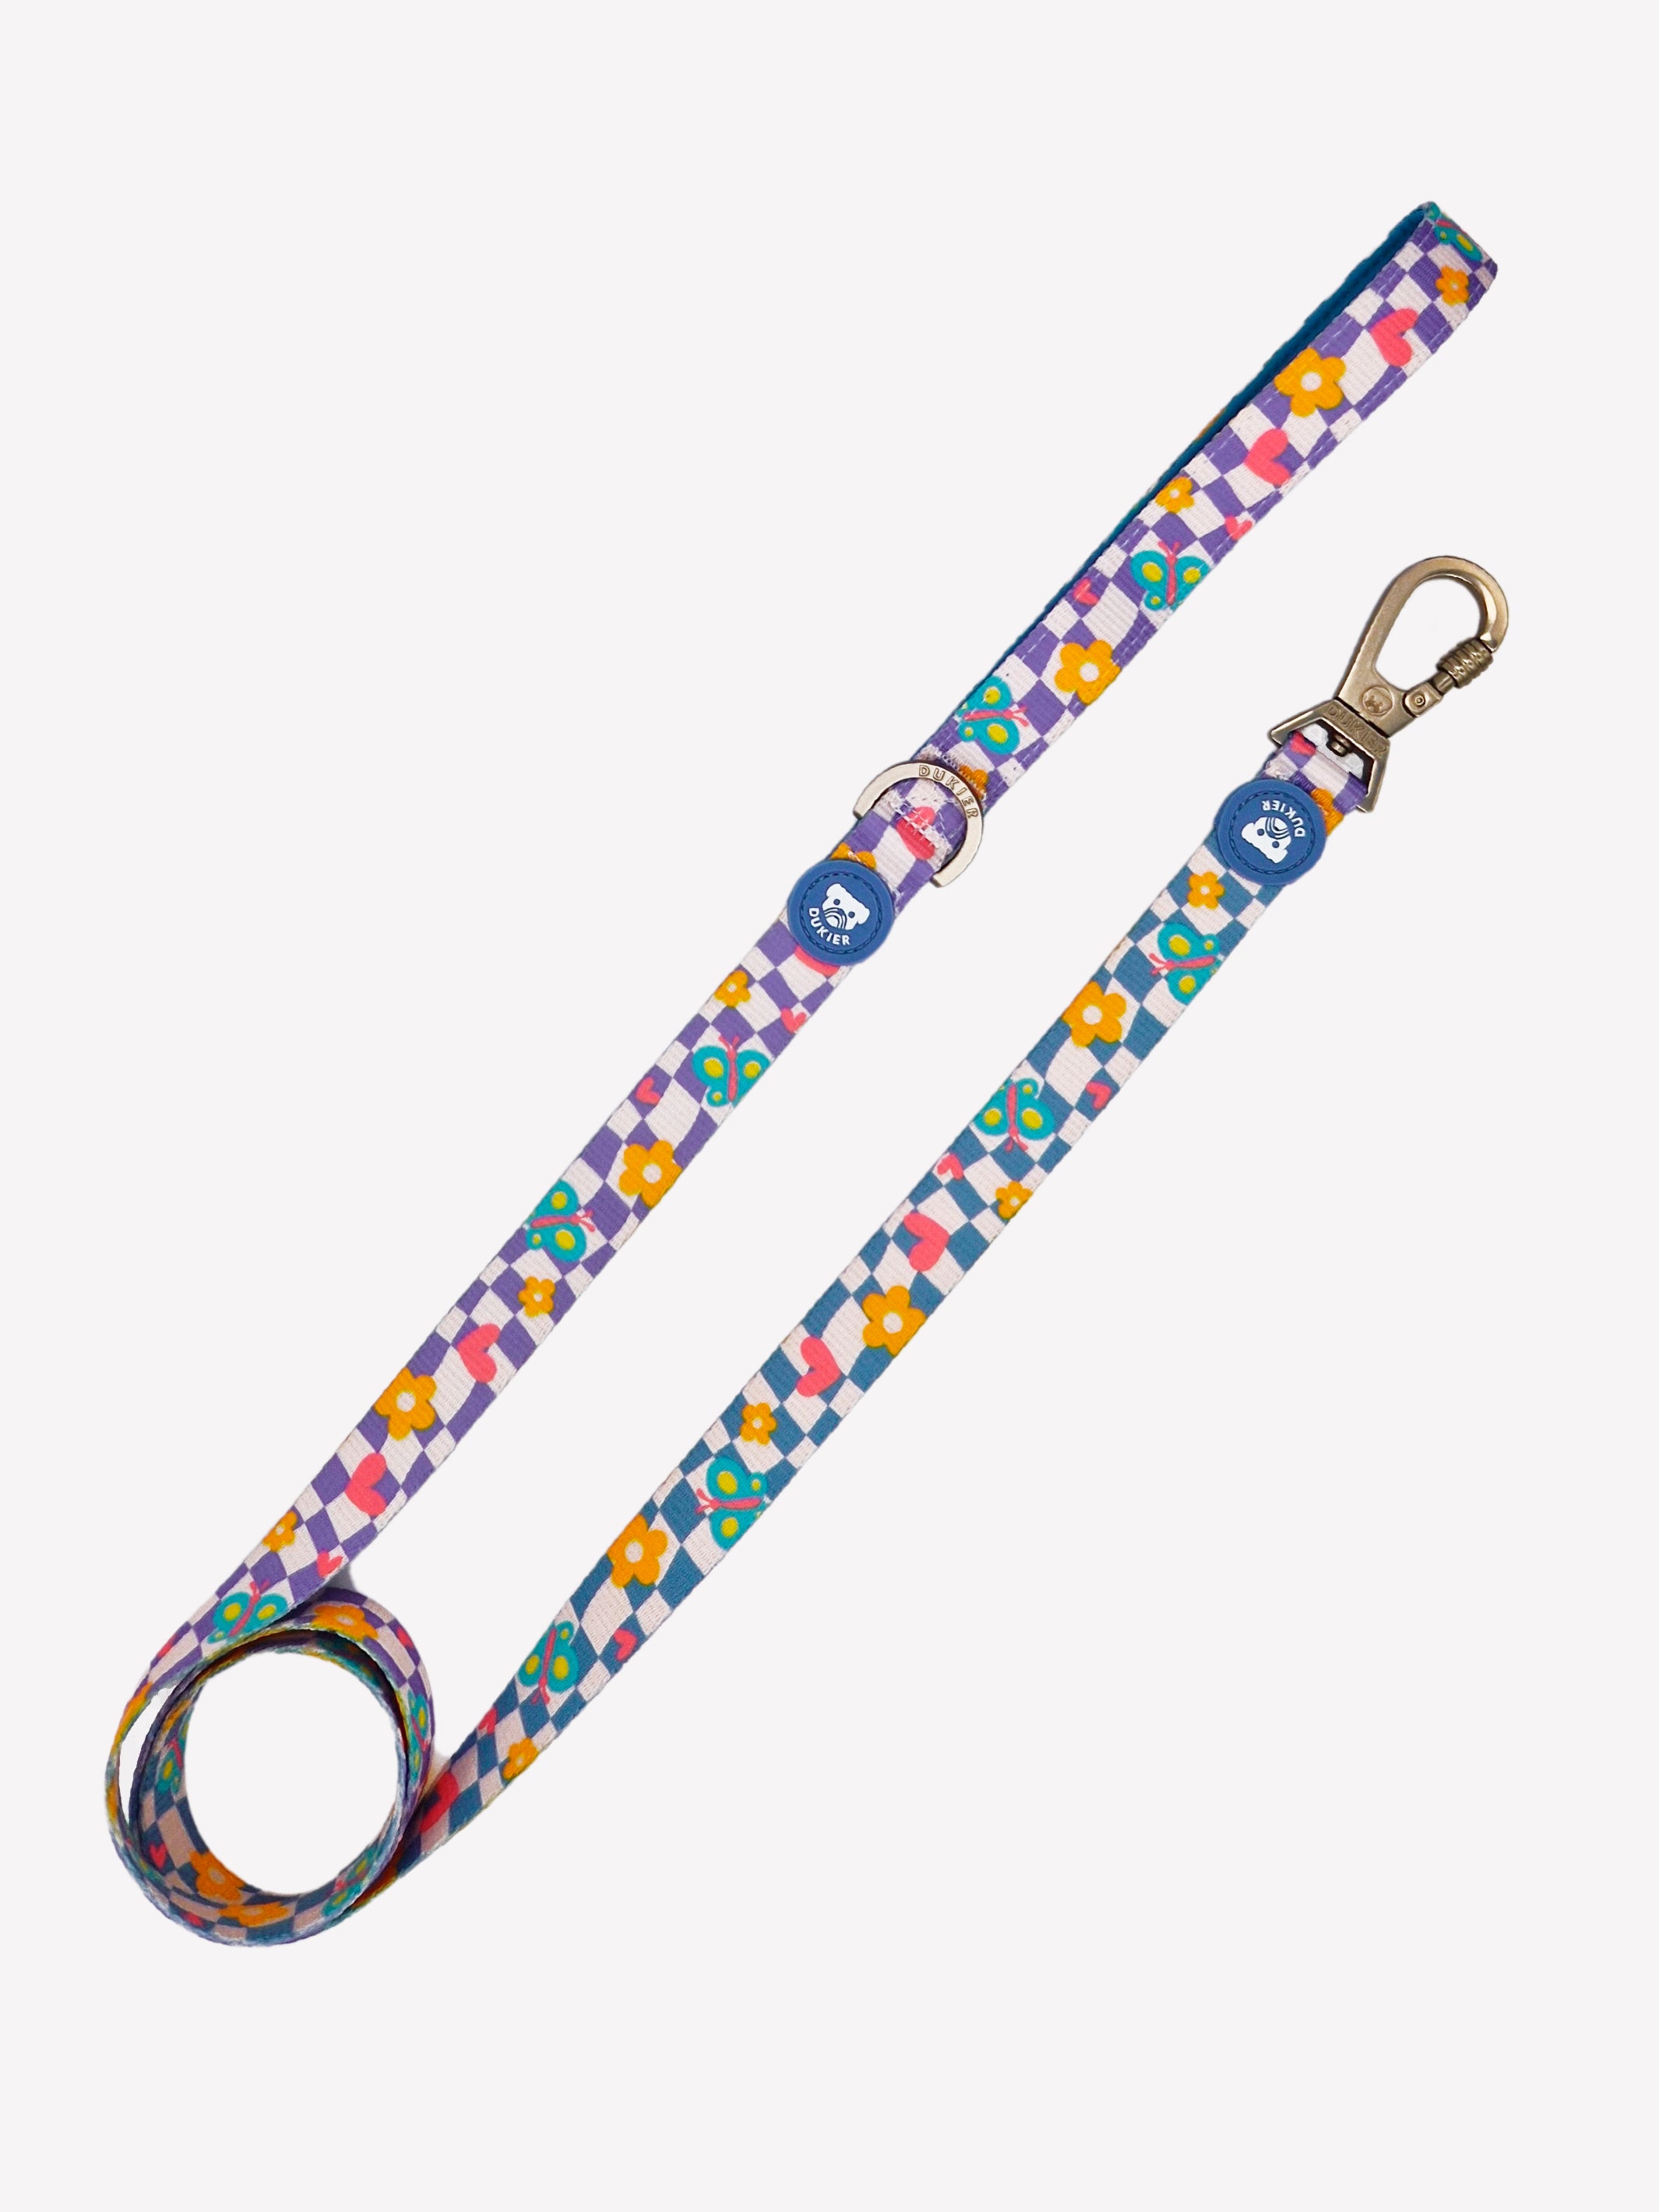 CHESS BOARD LEASH FOR DOGS